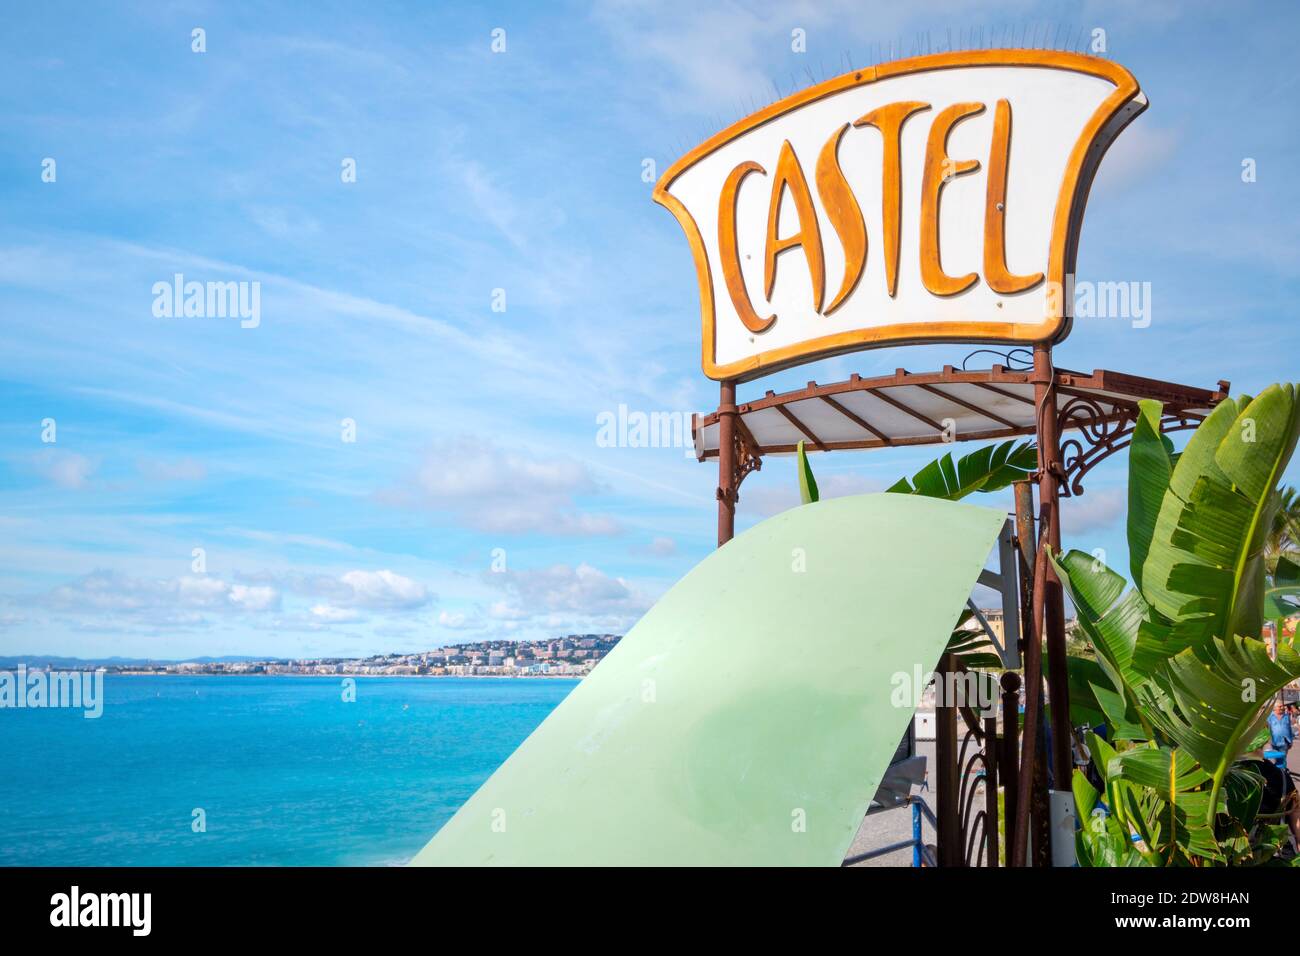 A general view of the Castel Plage resort and beach club sign on the French Riviera in Nice, France. Stock Photo